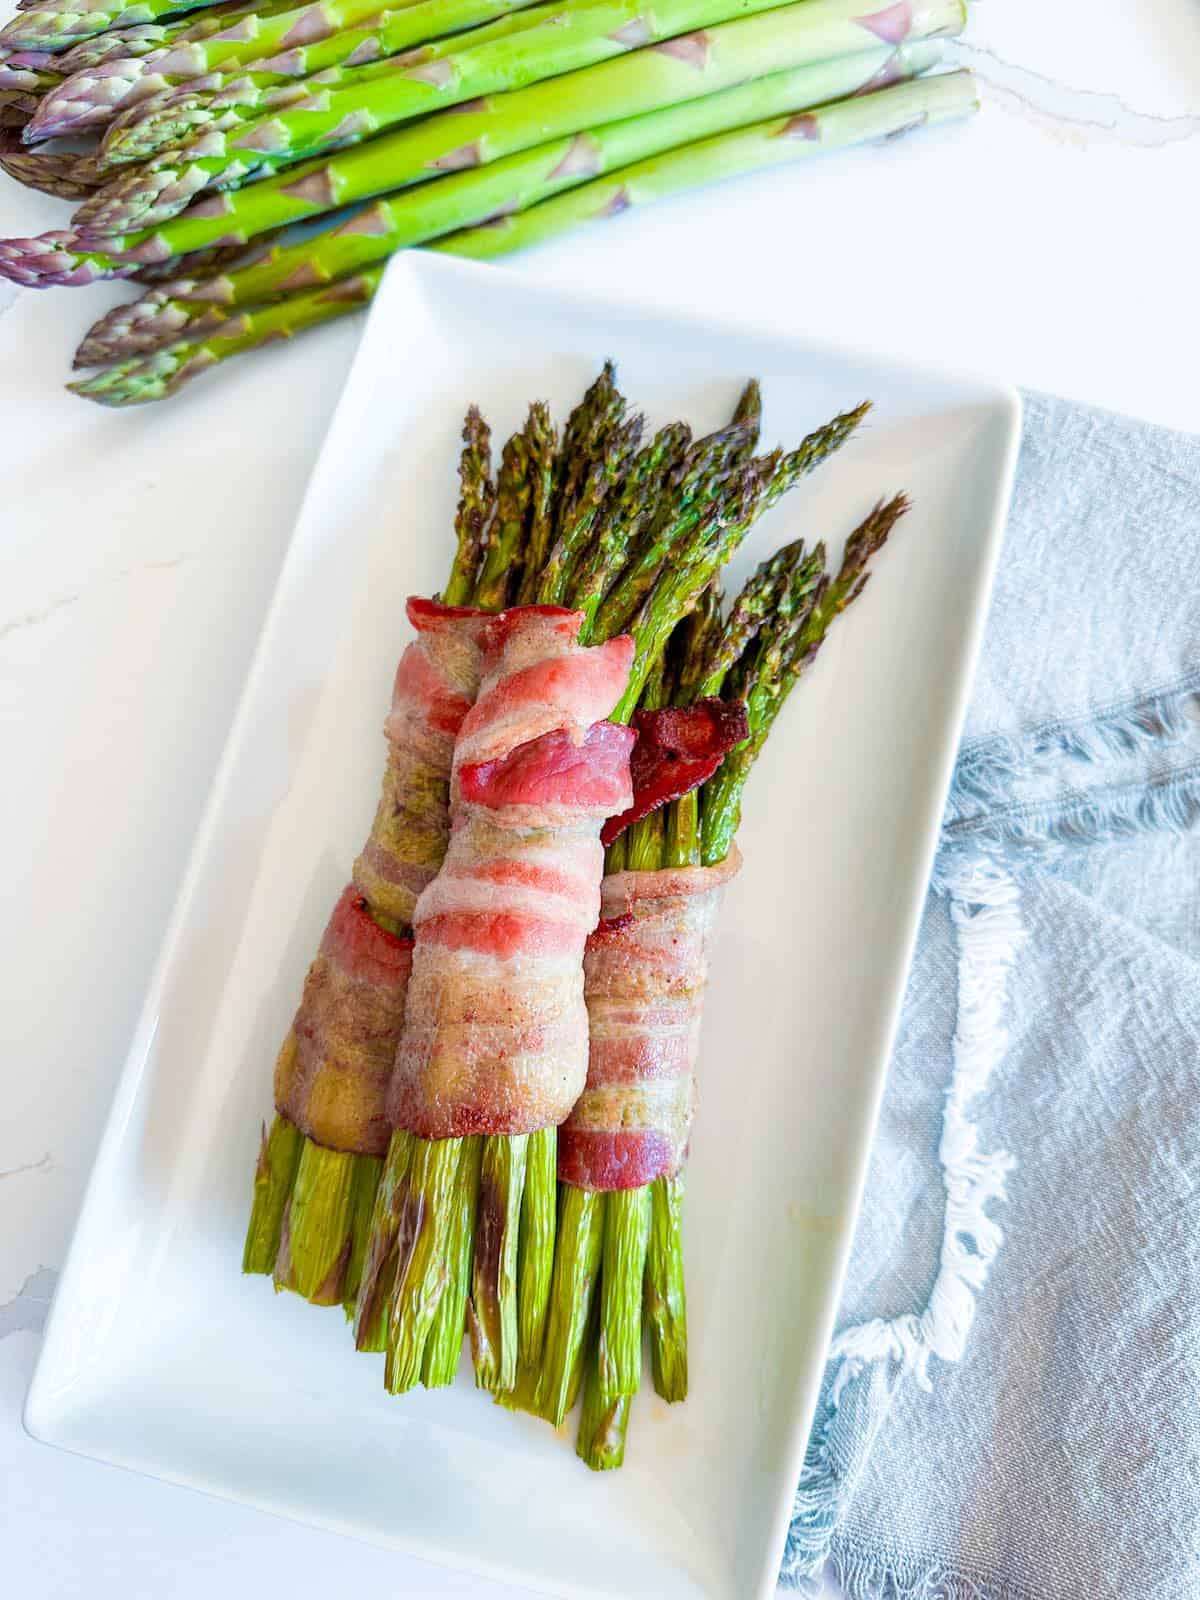 Asparagus spears wrapped in cooked bacon on a plate.